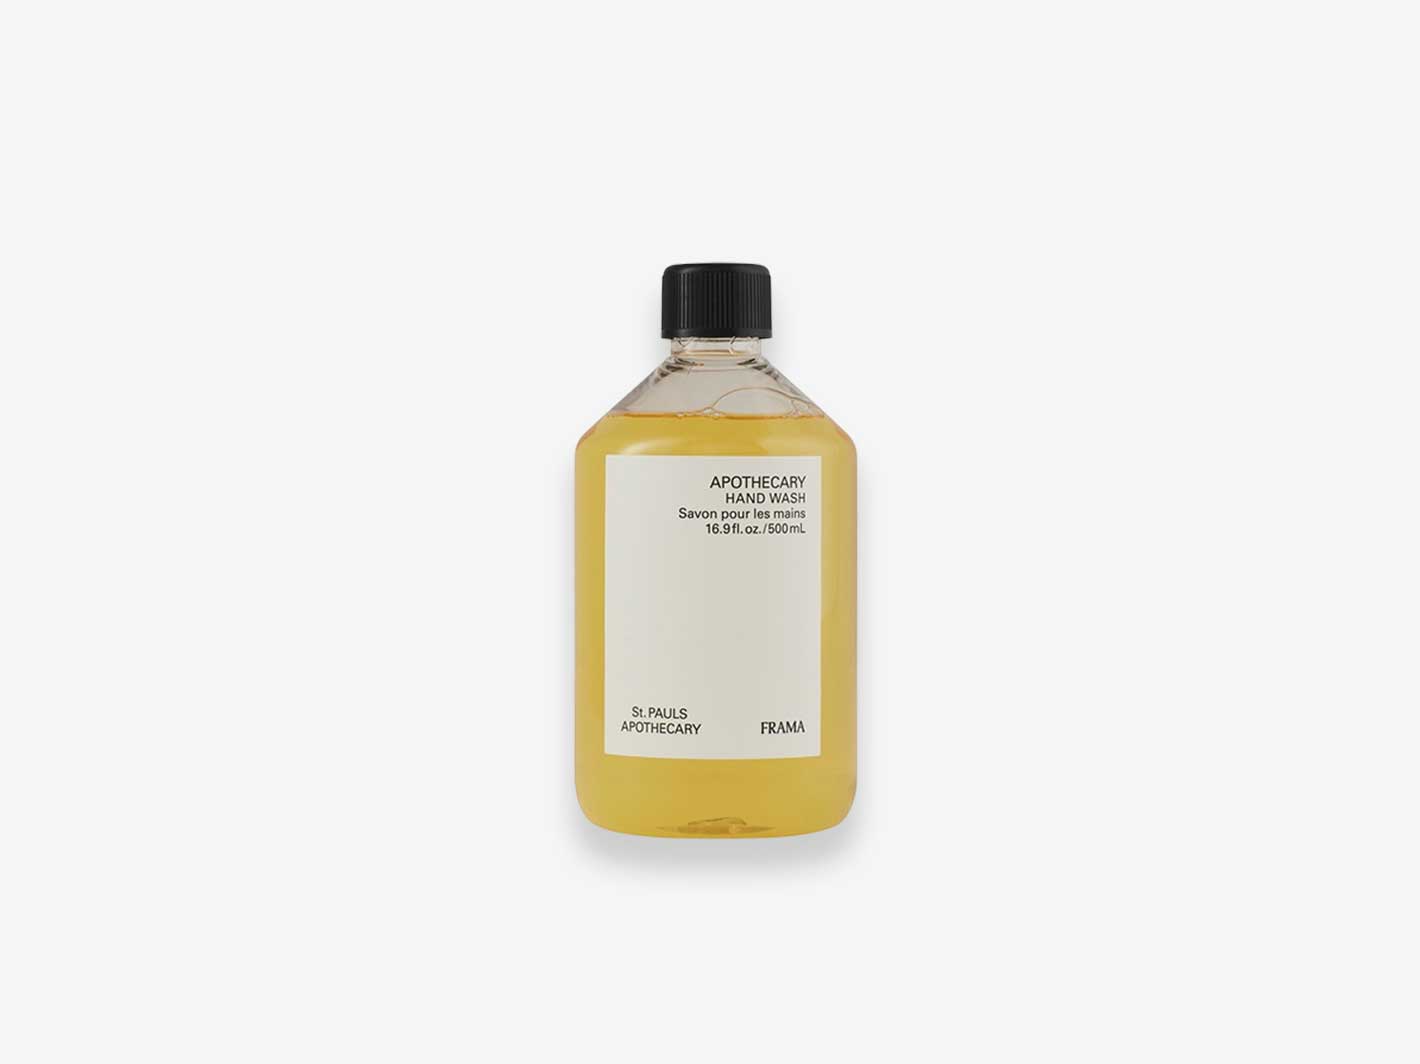 Apothecary Hand Wash Refill 500ml